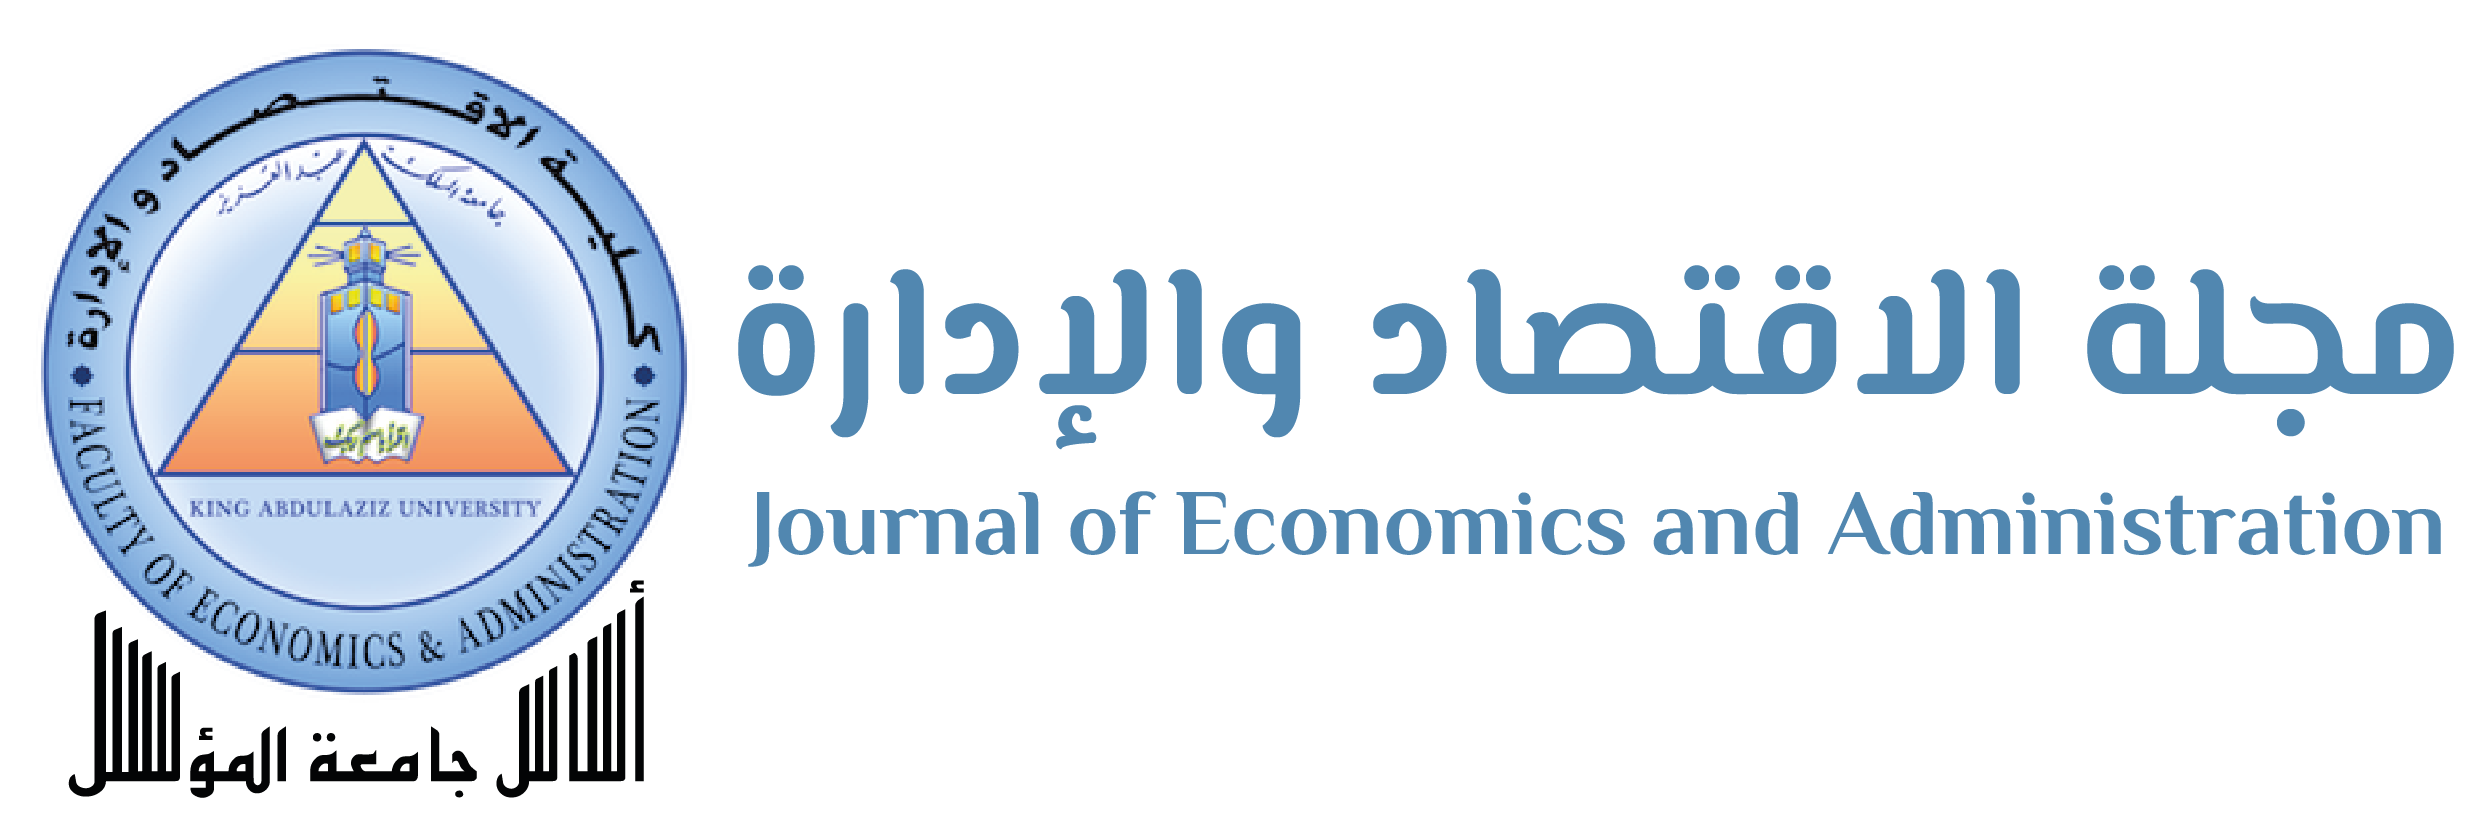  Journal of Economics and Administration